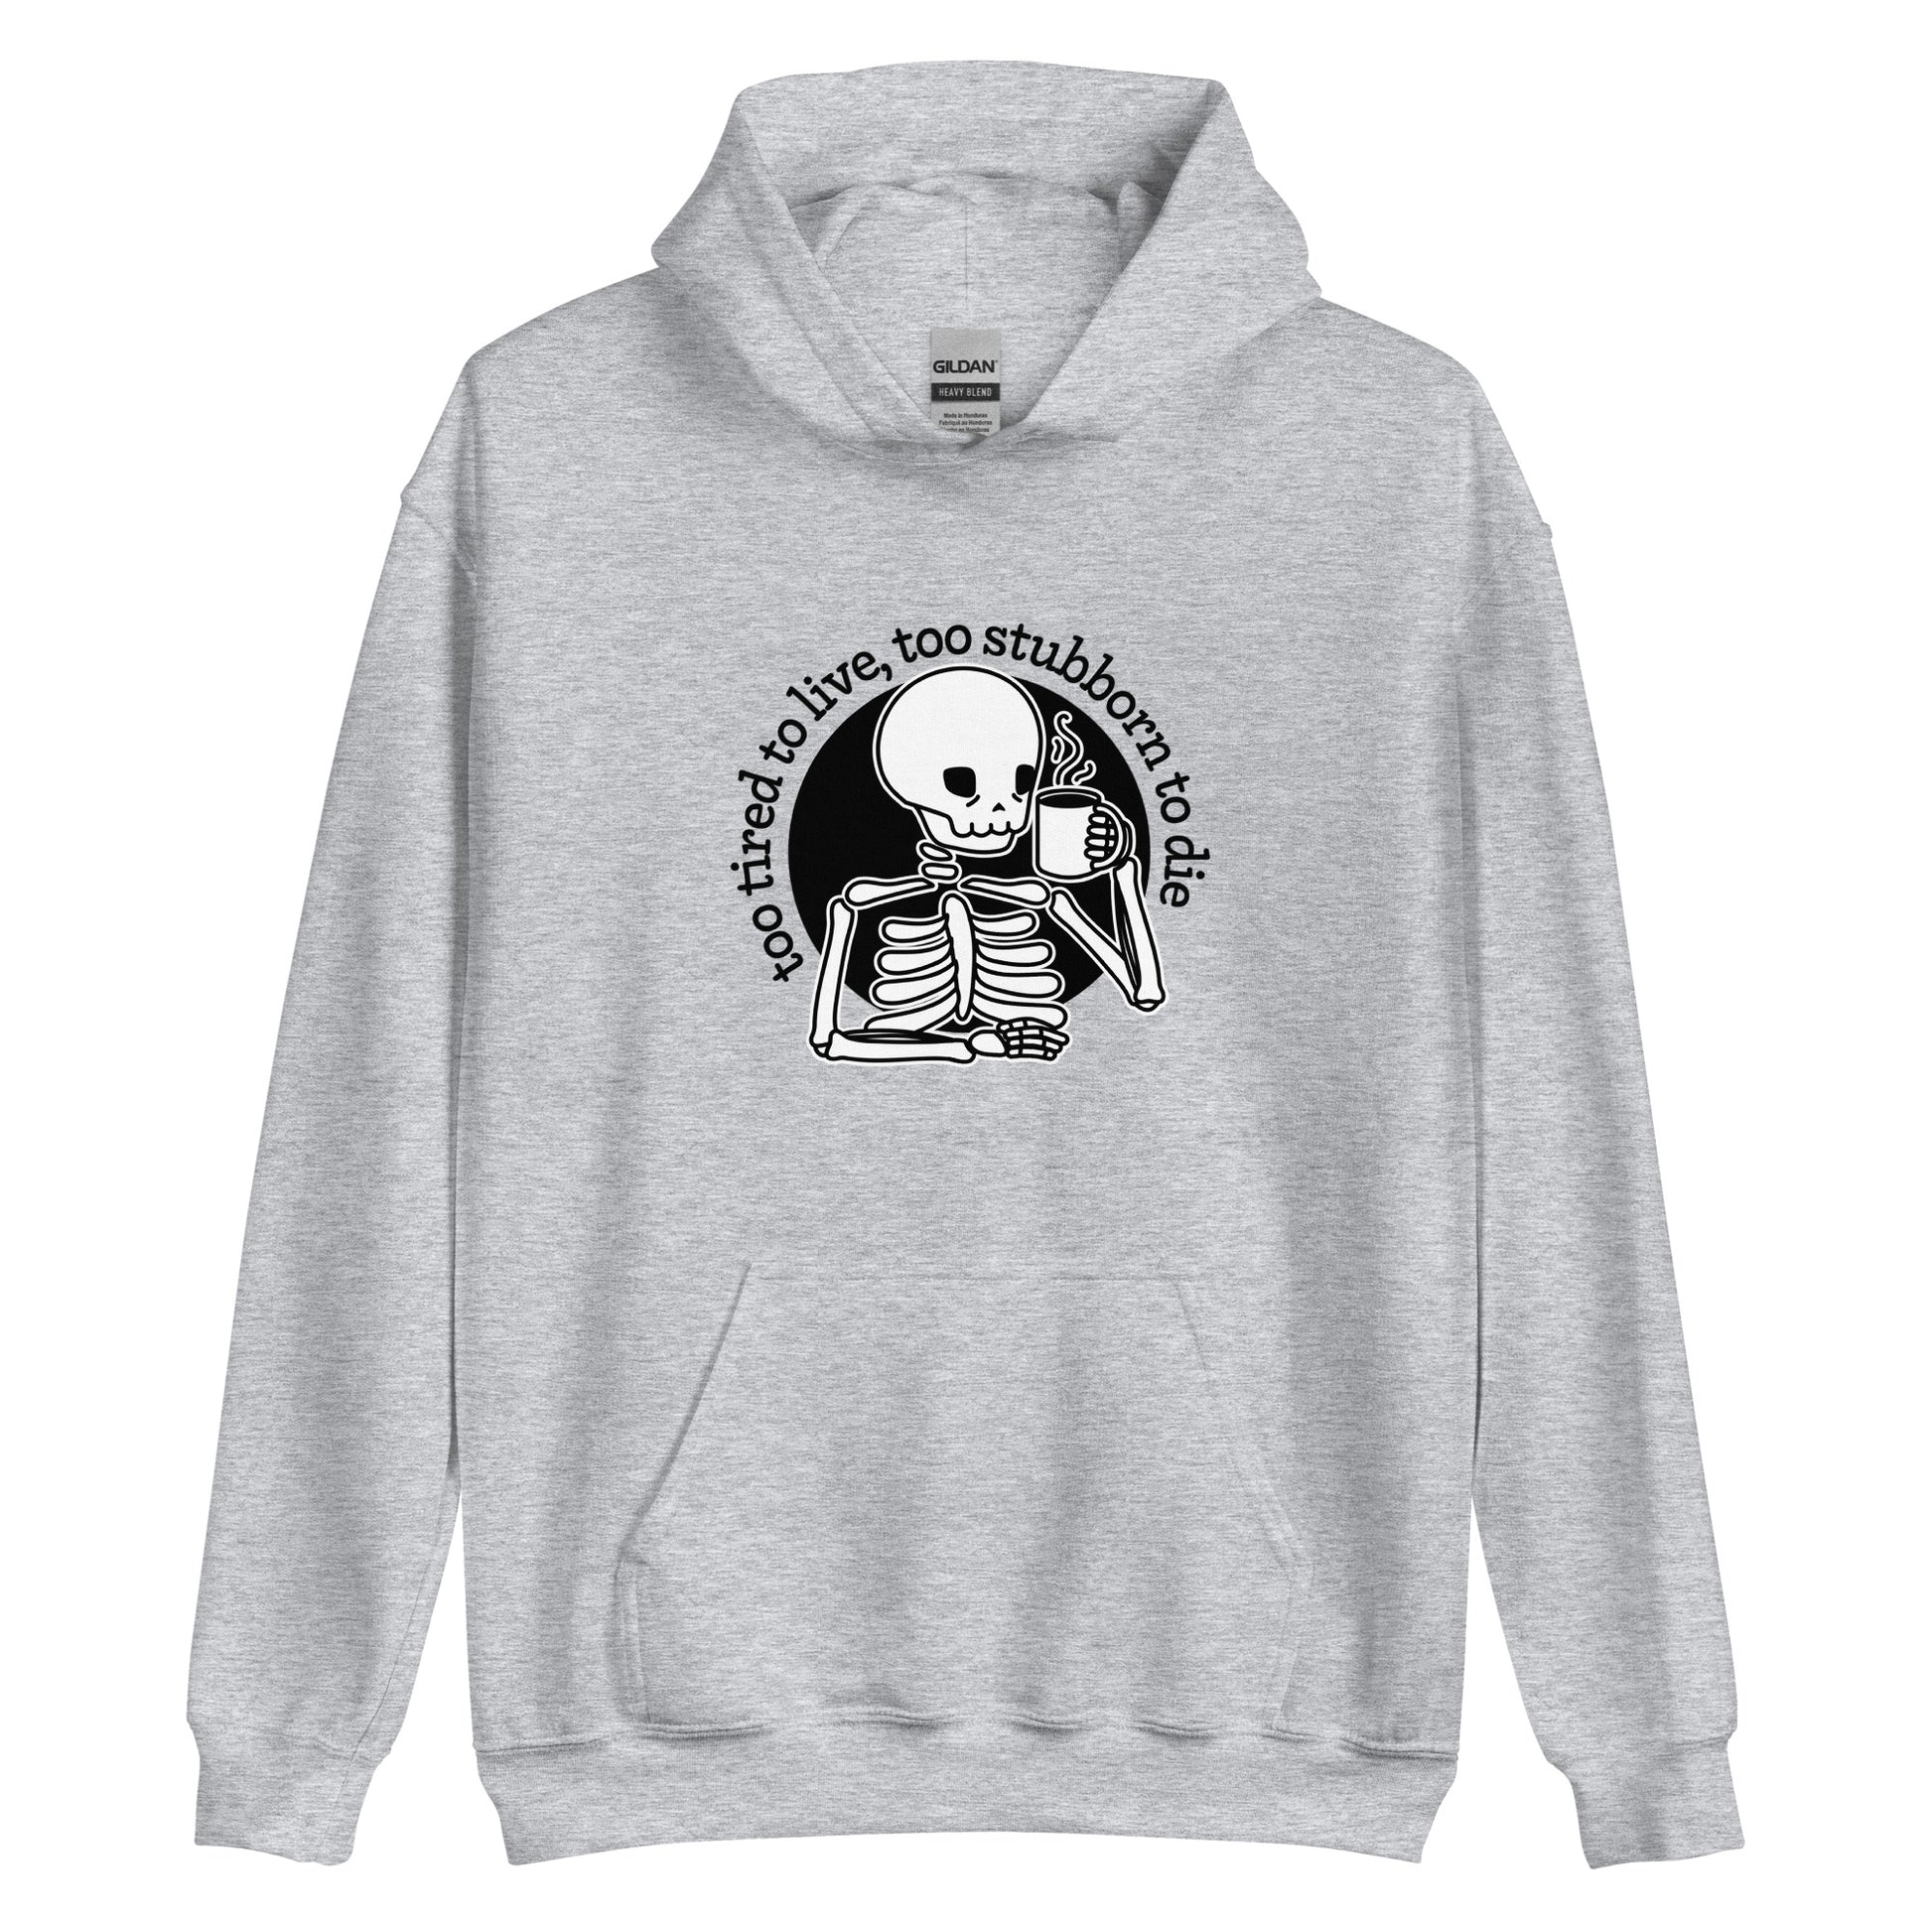 A grey hooded sweatshirt featuring an illustration of a tired-looking skeleton holding a steaming mug. Text in an arc above the skeleton reads "too tired to live, too stubborn to die"